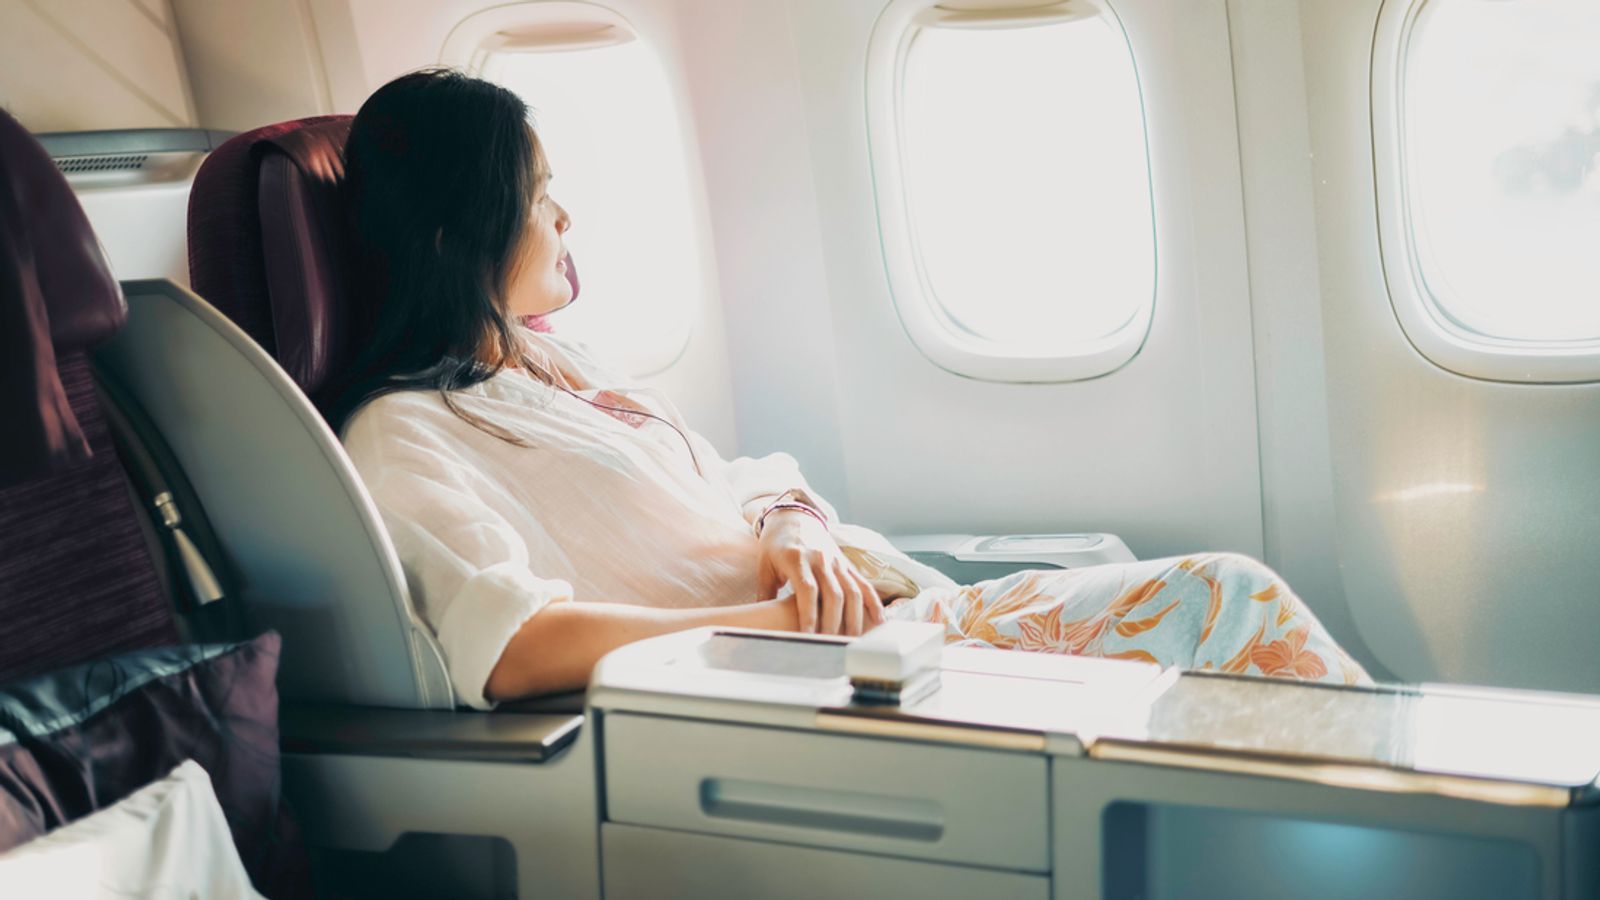 How to Get a Free Upgrade on a Flight